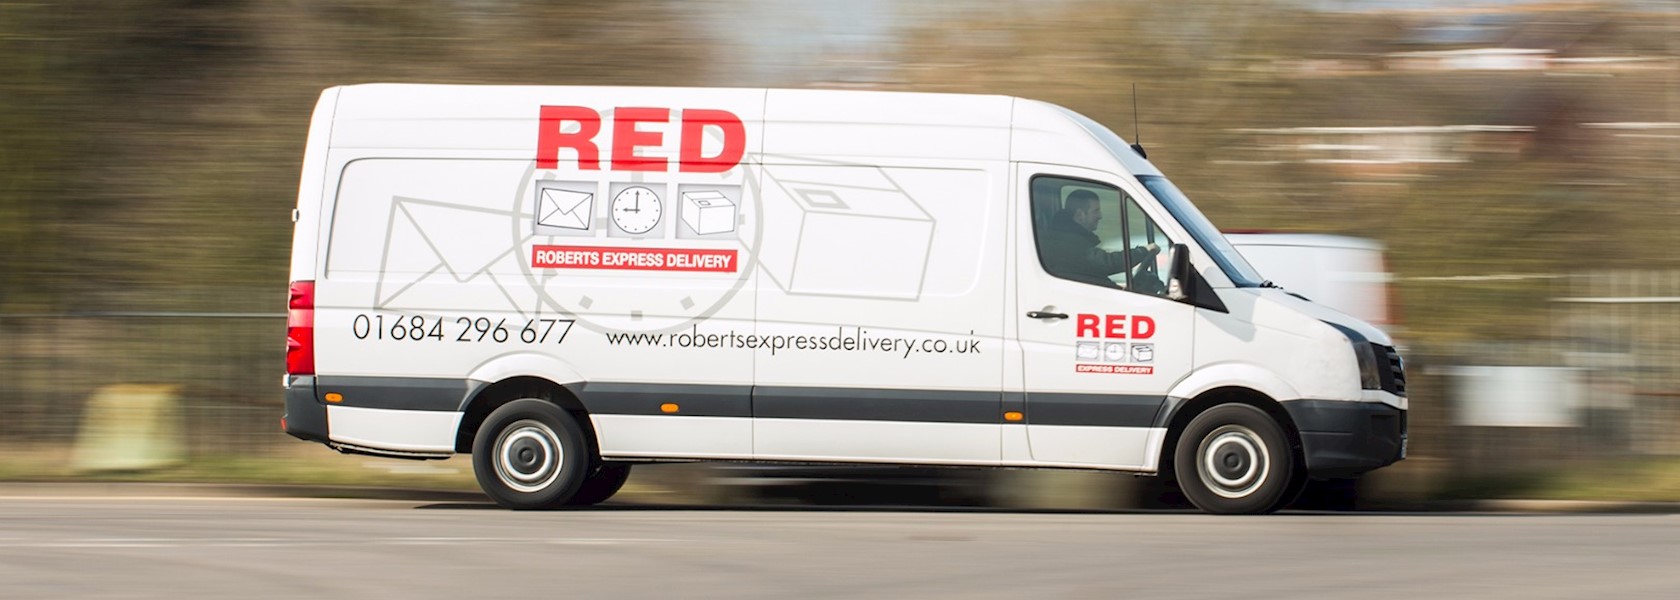 RED Roberts Express Delivery